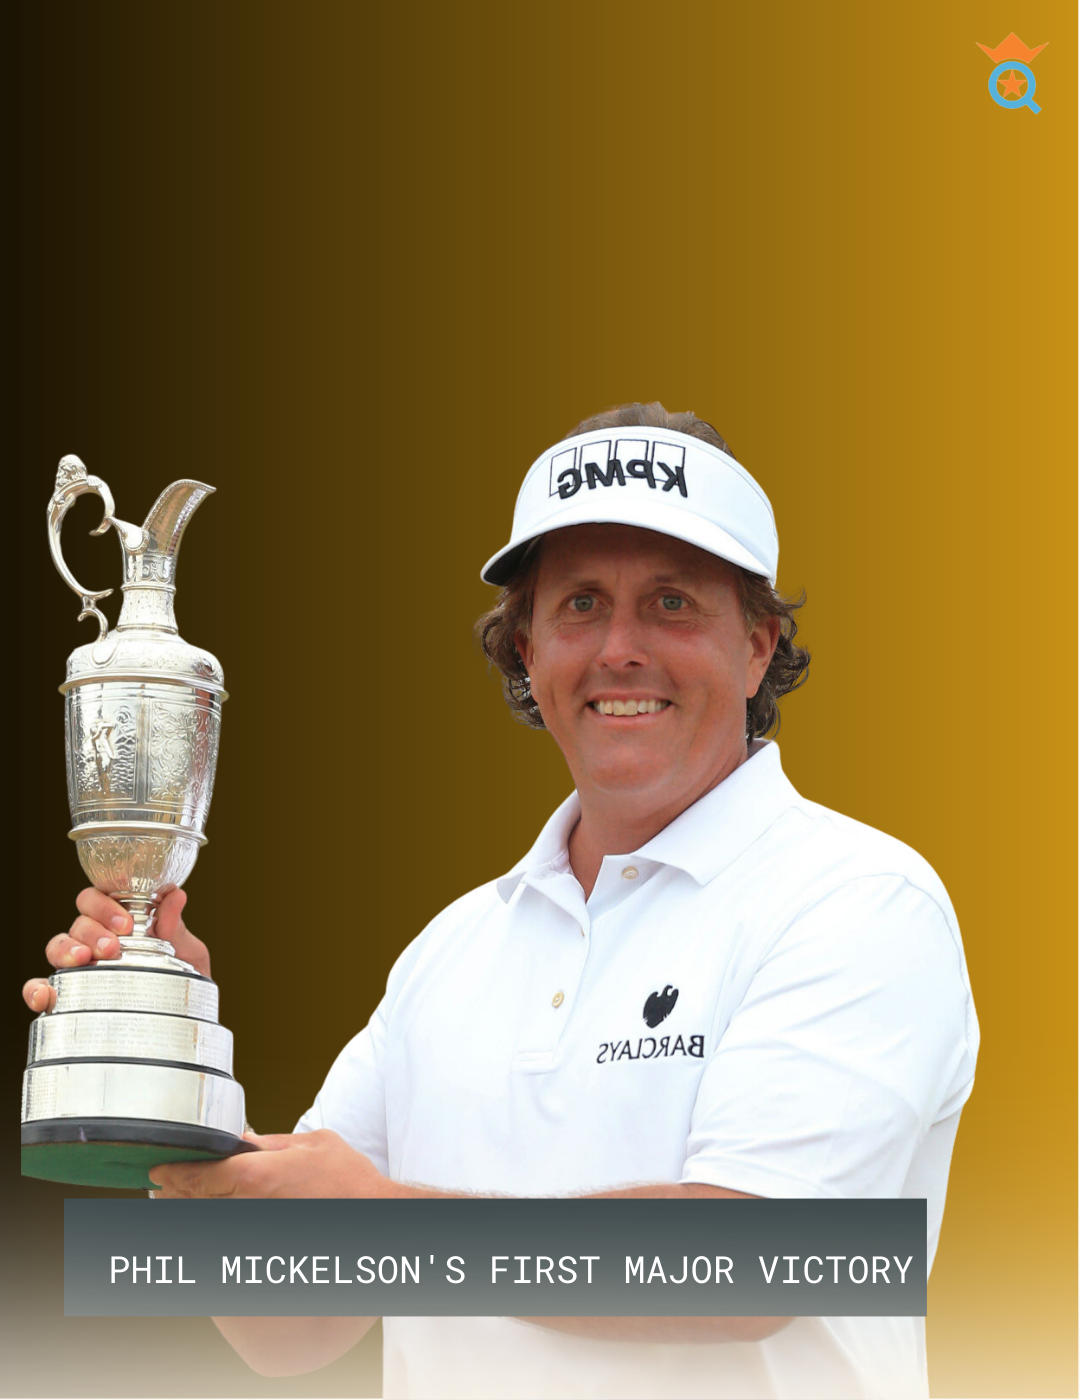 Phil Mickelson's First Major Victory